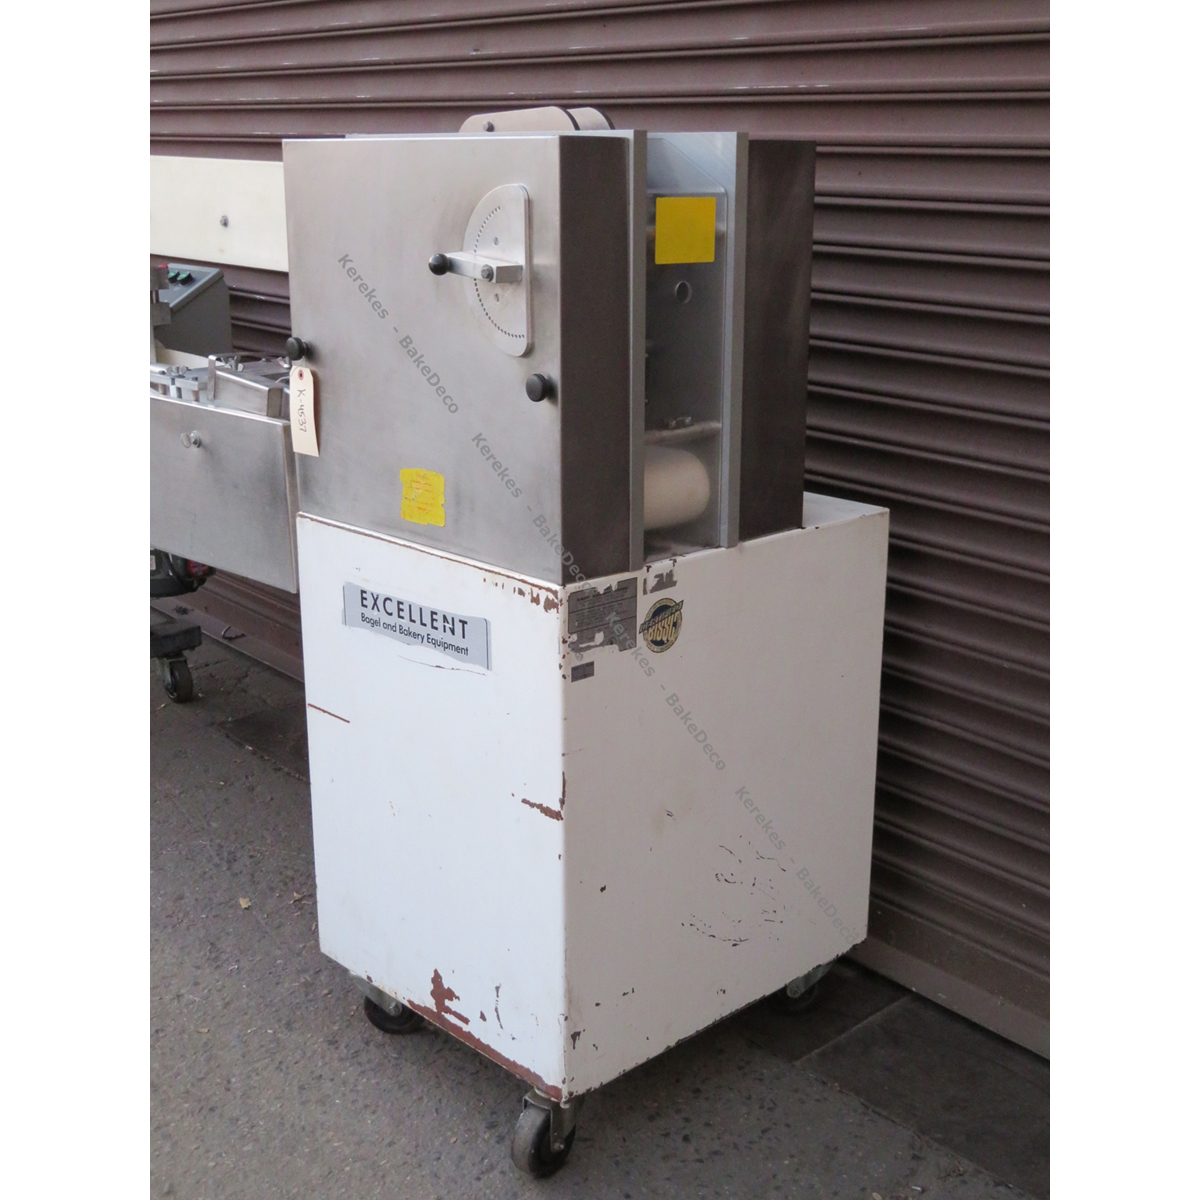 Excellent Bakery Equipment Bagel Former KSD-100/KSF-300S, Used Excellent Condition image 6